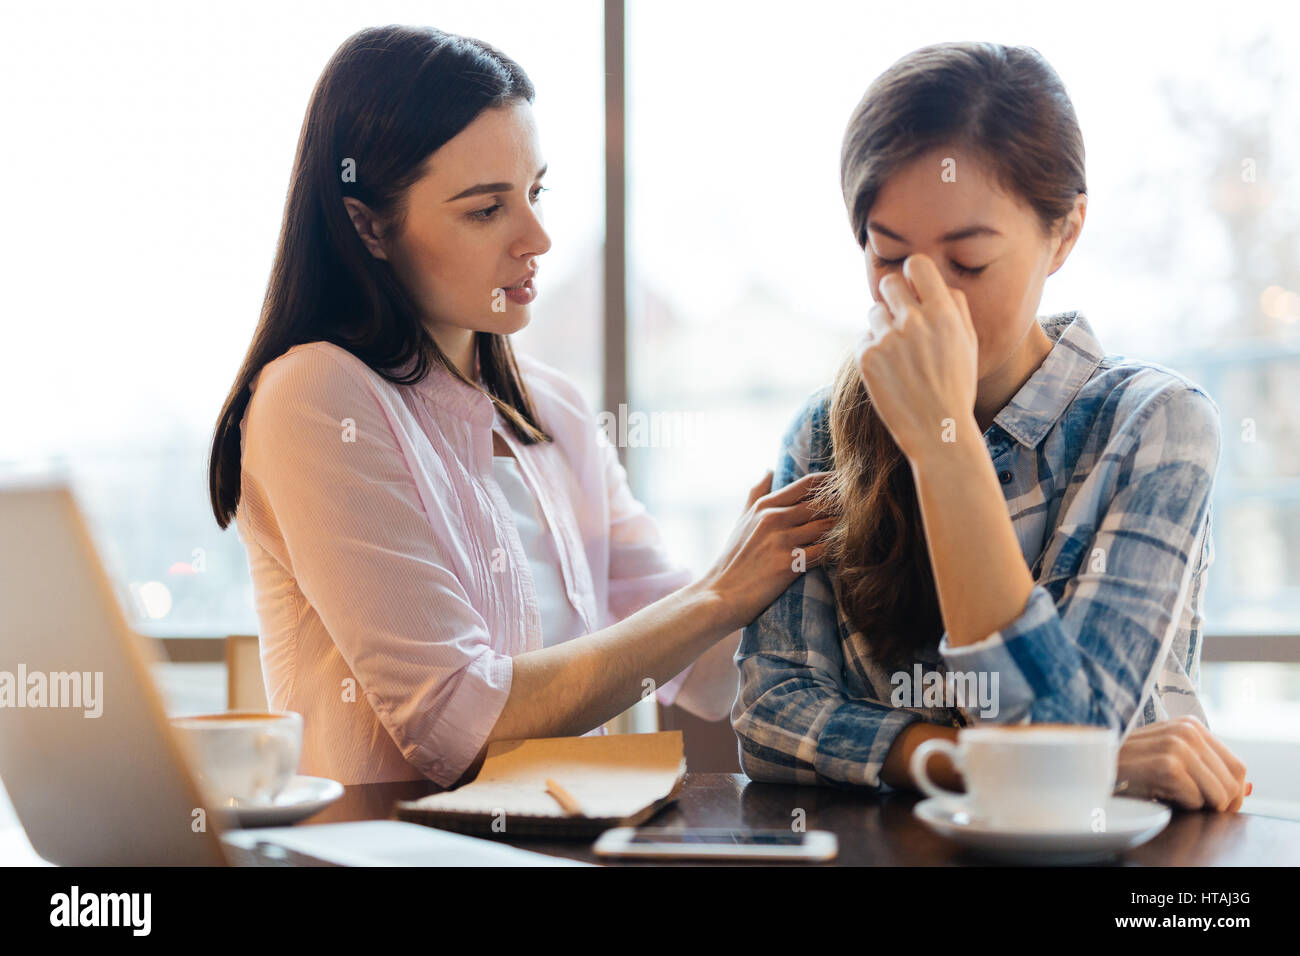 Sad young woman hiding her face crying at table in cafe and her friend hugging her by shoulders in compassion, giving advice trying to console her Stock Photo